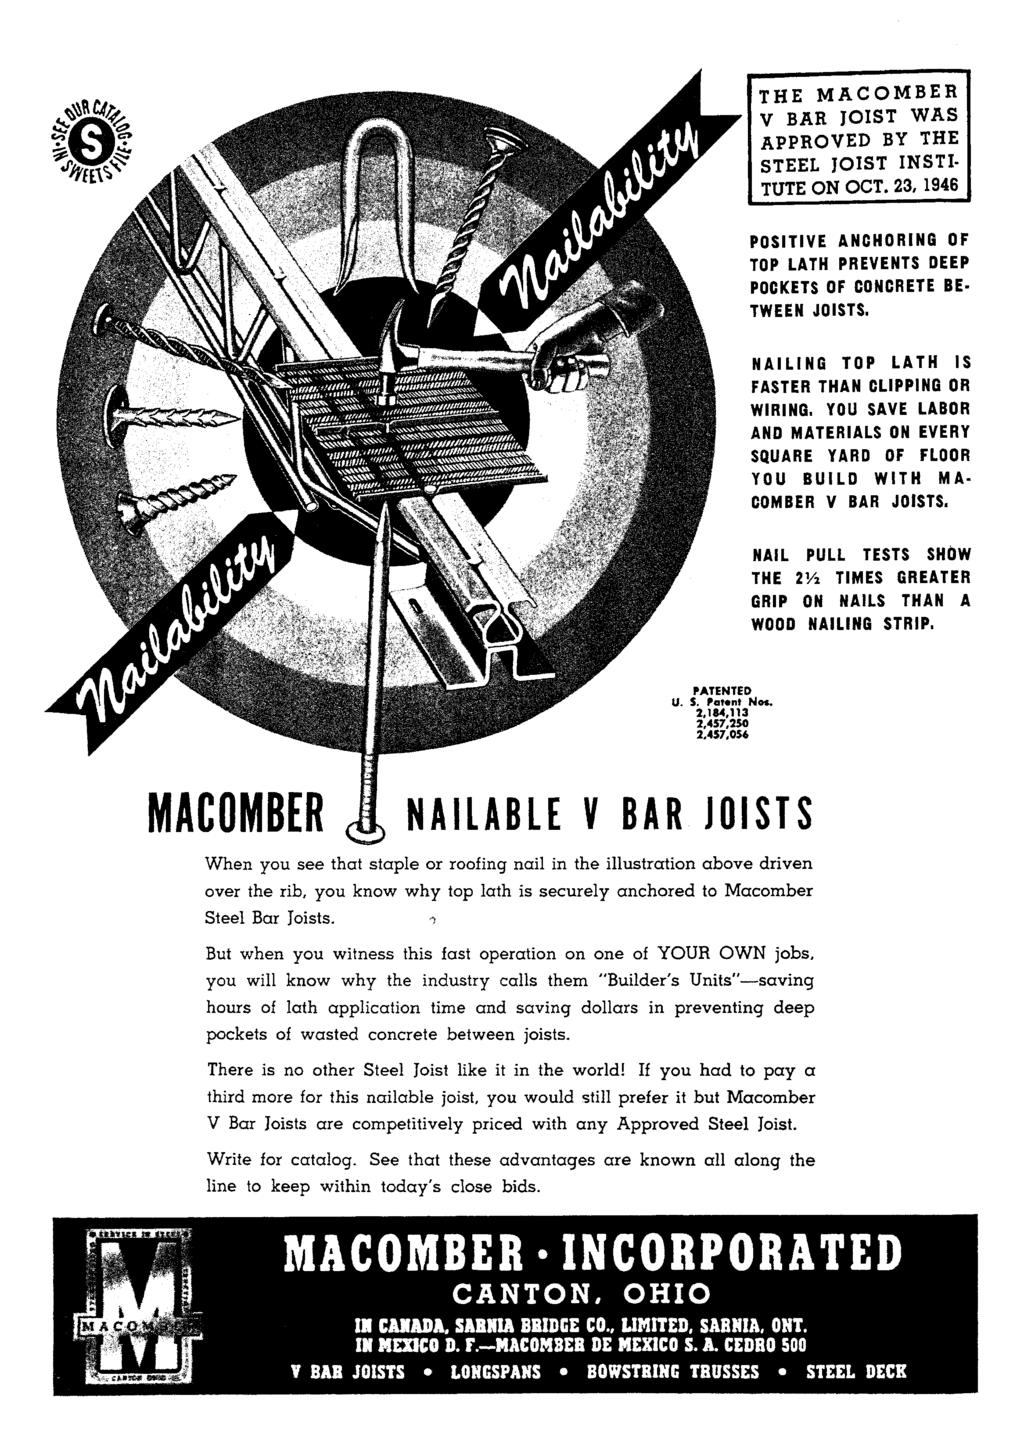 THE MACOMBER V BAR JOIST WAS APPROVED BY THE STEEL JOIST INSTI- TUTE ON OCT. 23, 1946 POSITIVE ANCHORING OF TOP LATH PREVENTS DEEP POCKETS OF CONCRETE BE- TWEEN JOISTS.